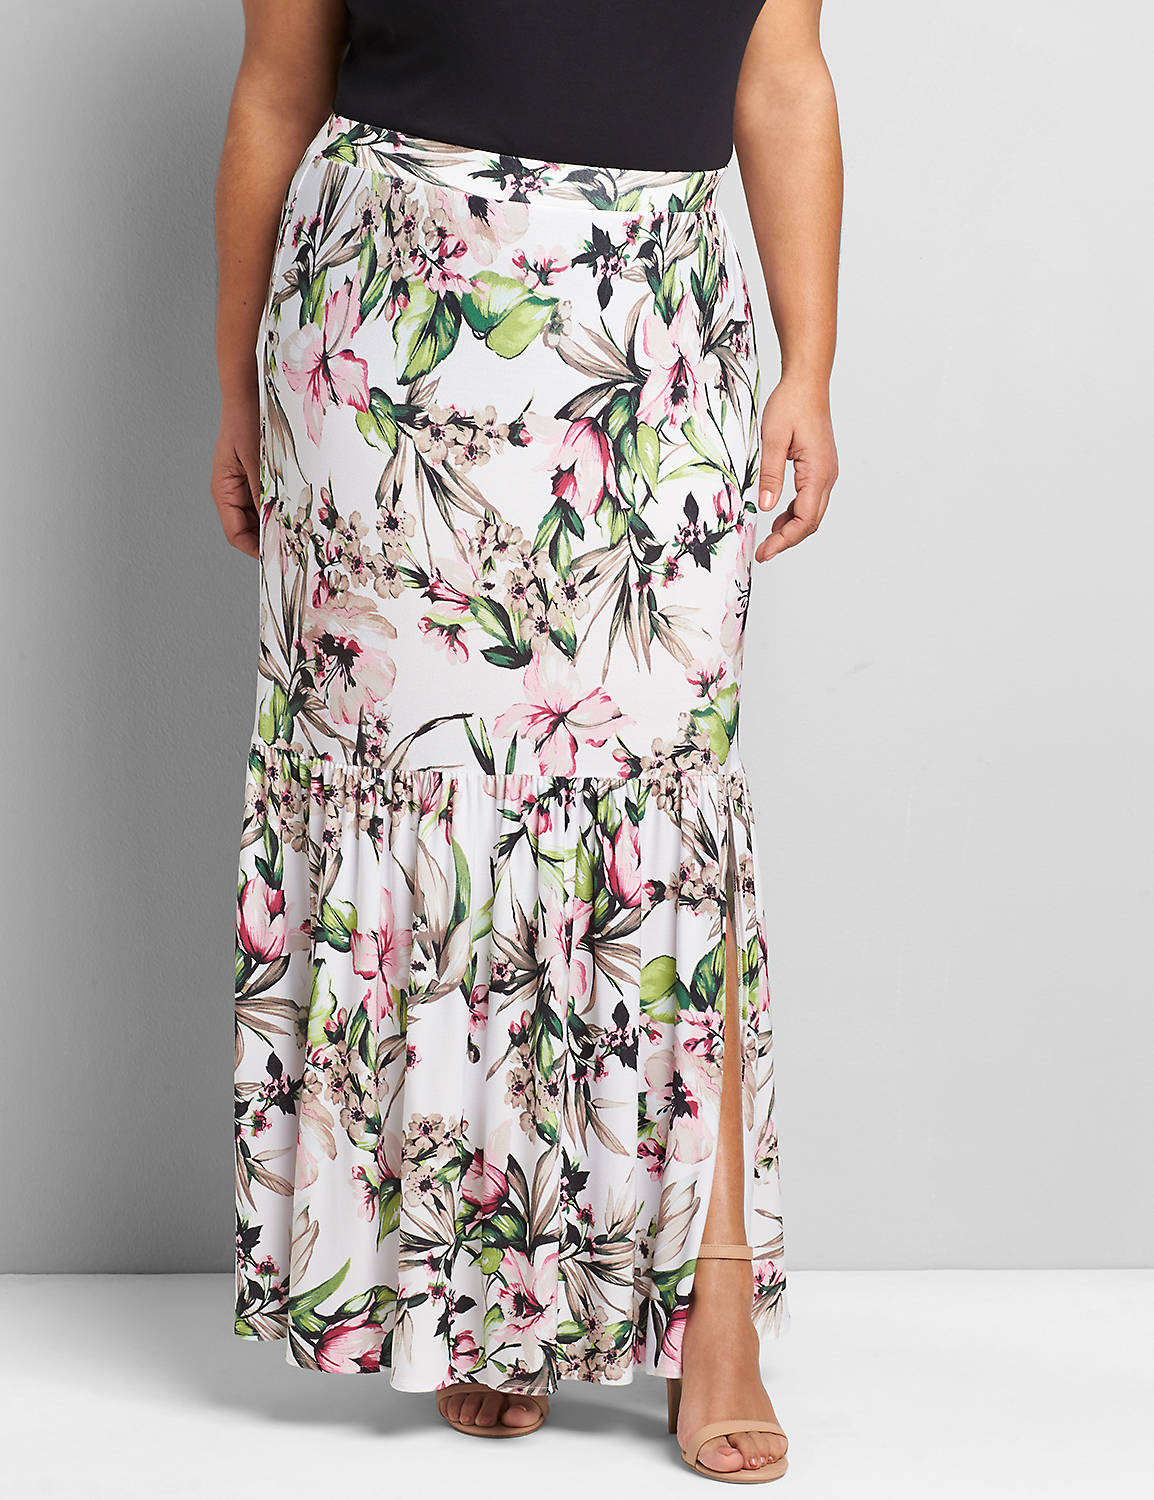 1119194 Pull-On Front Slit Midi Skirt 1119194:LBSP21182_OpenFloralTropical_C1:14/16 Product Image 3